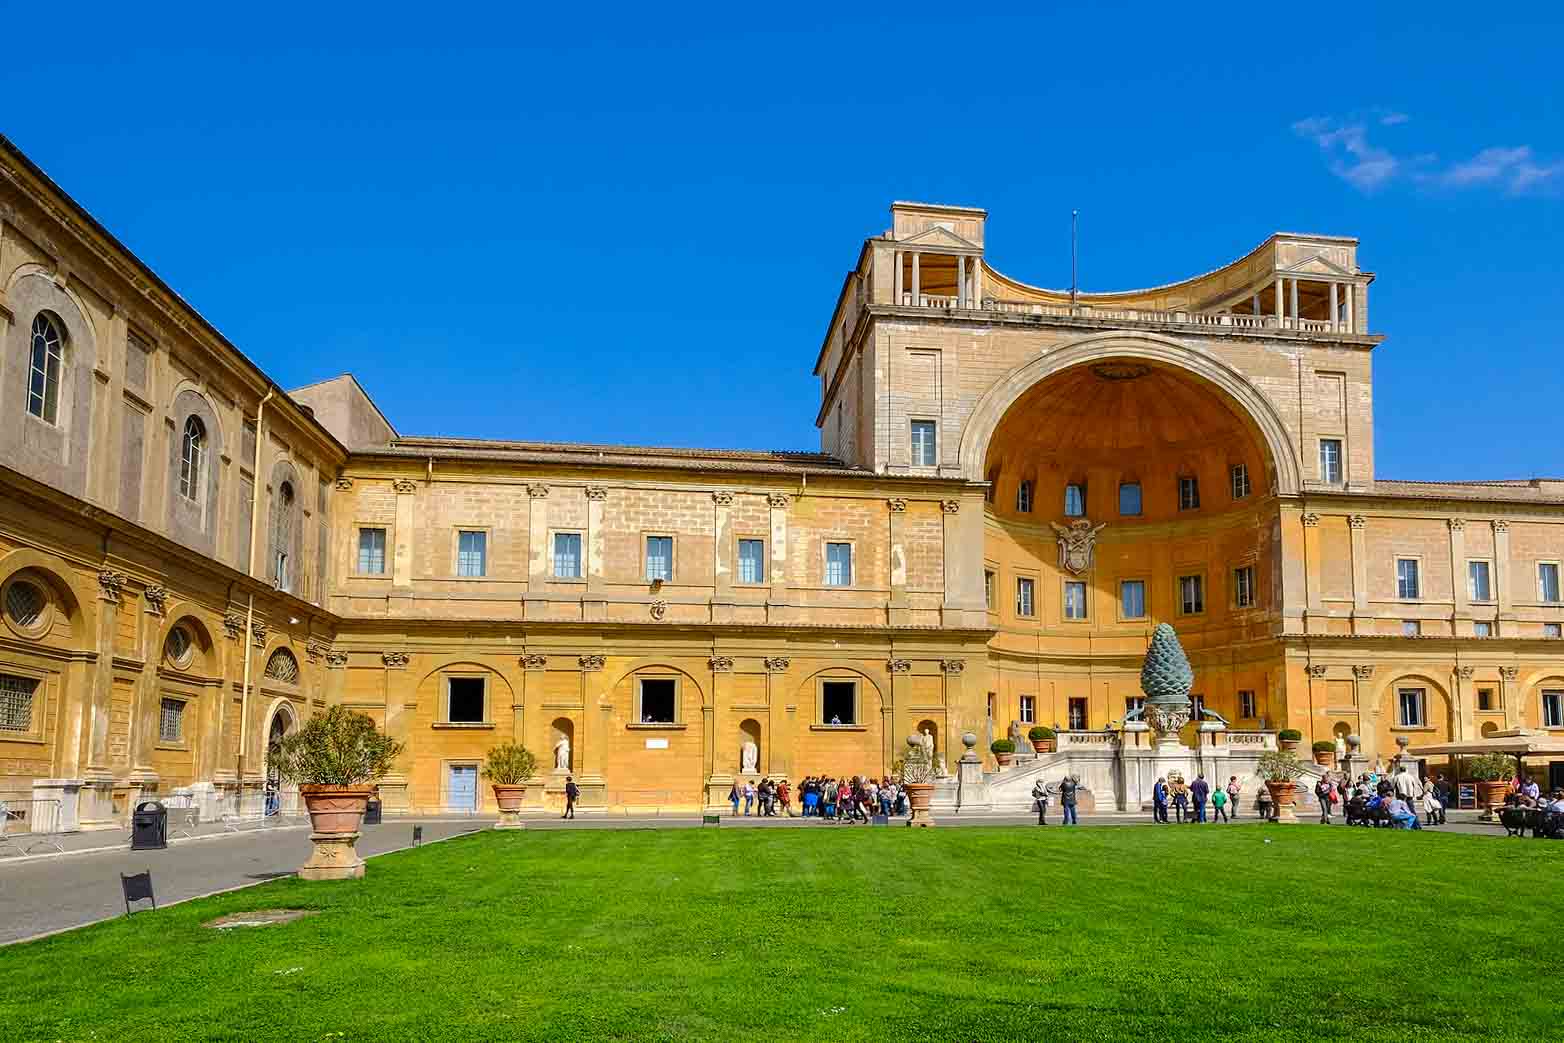 How To Avoid The Long Lines At Vatican Museums in Rome, Italy 1